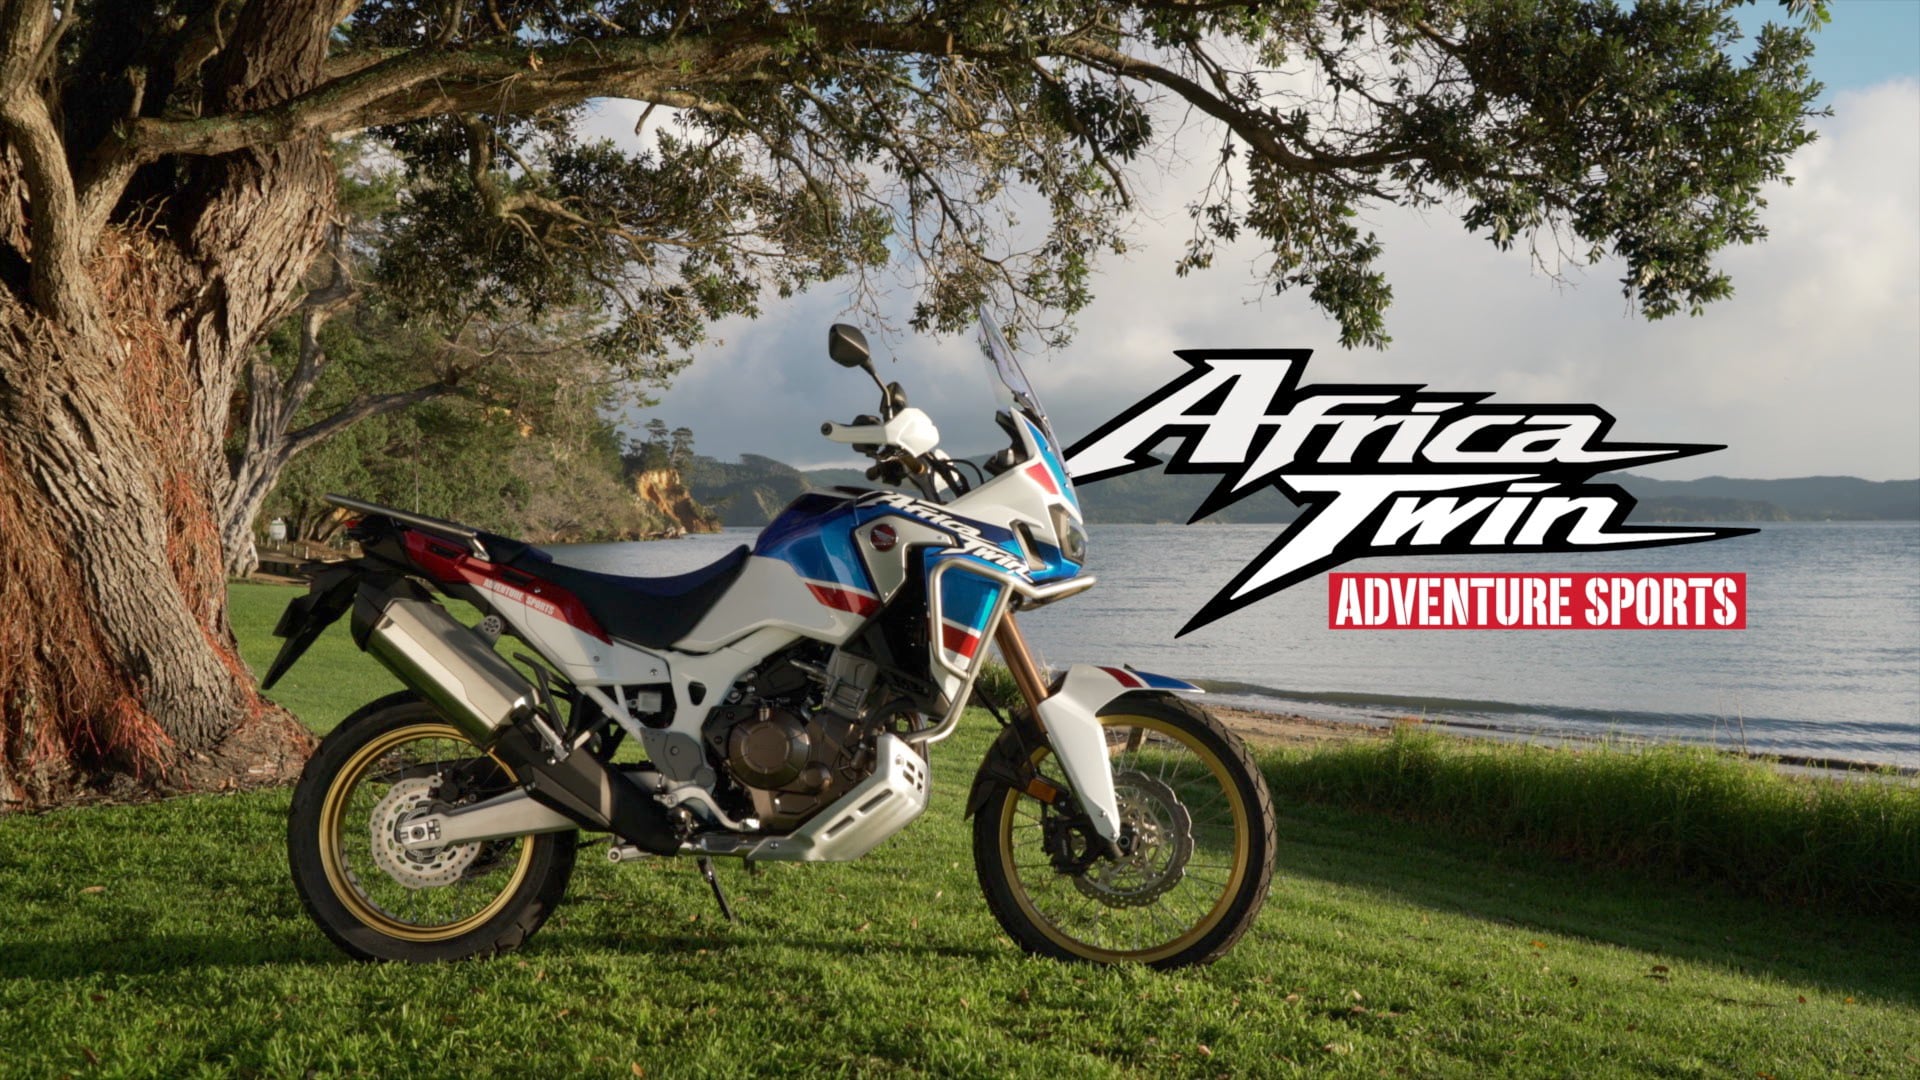 Blue Wing Honda - Introducing the 2018 Africa Twin Adventure Sports